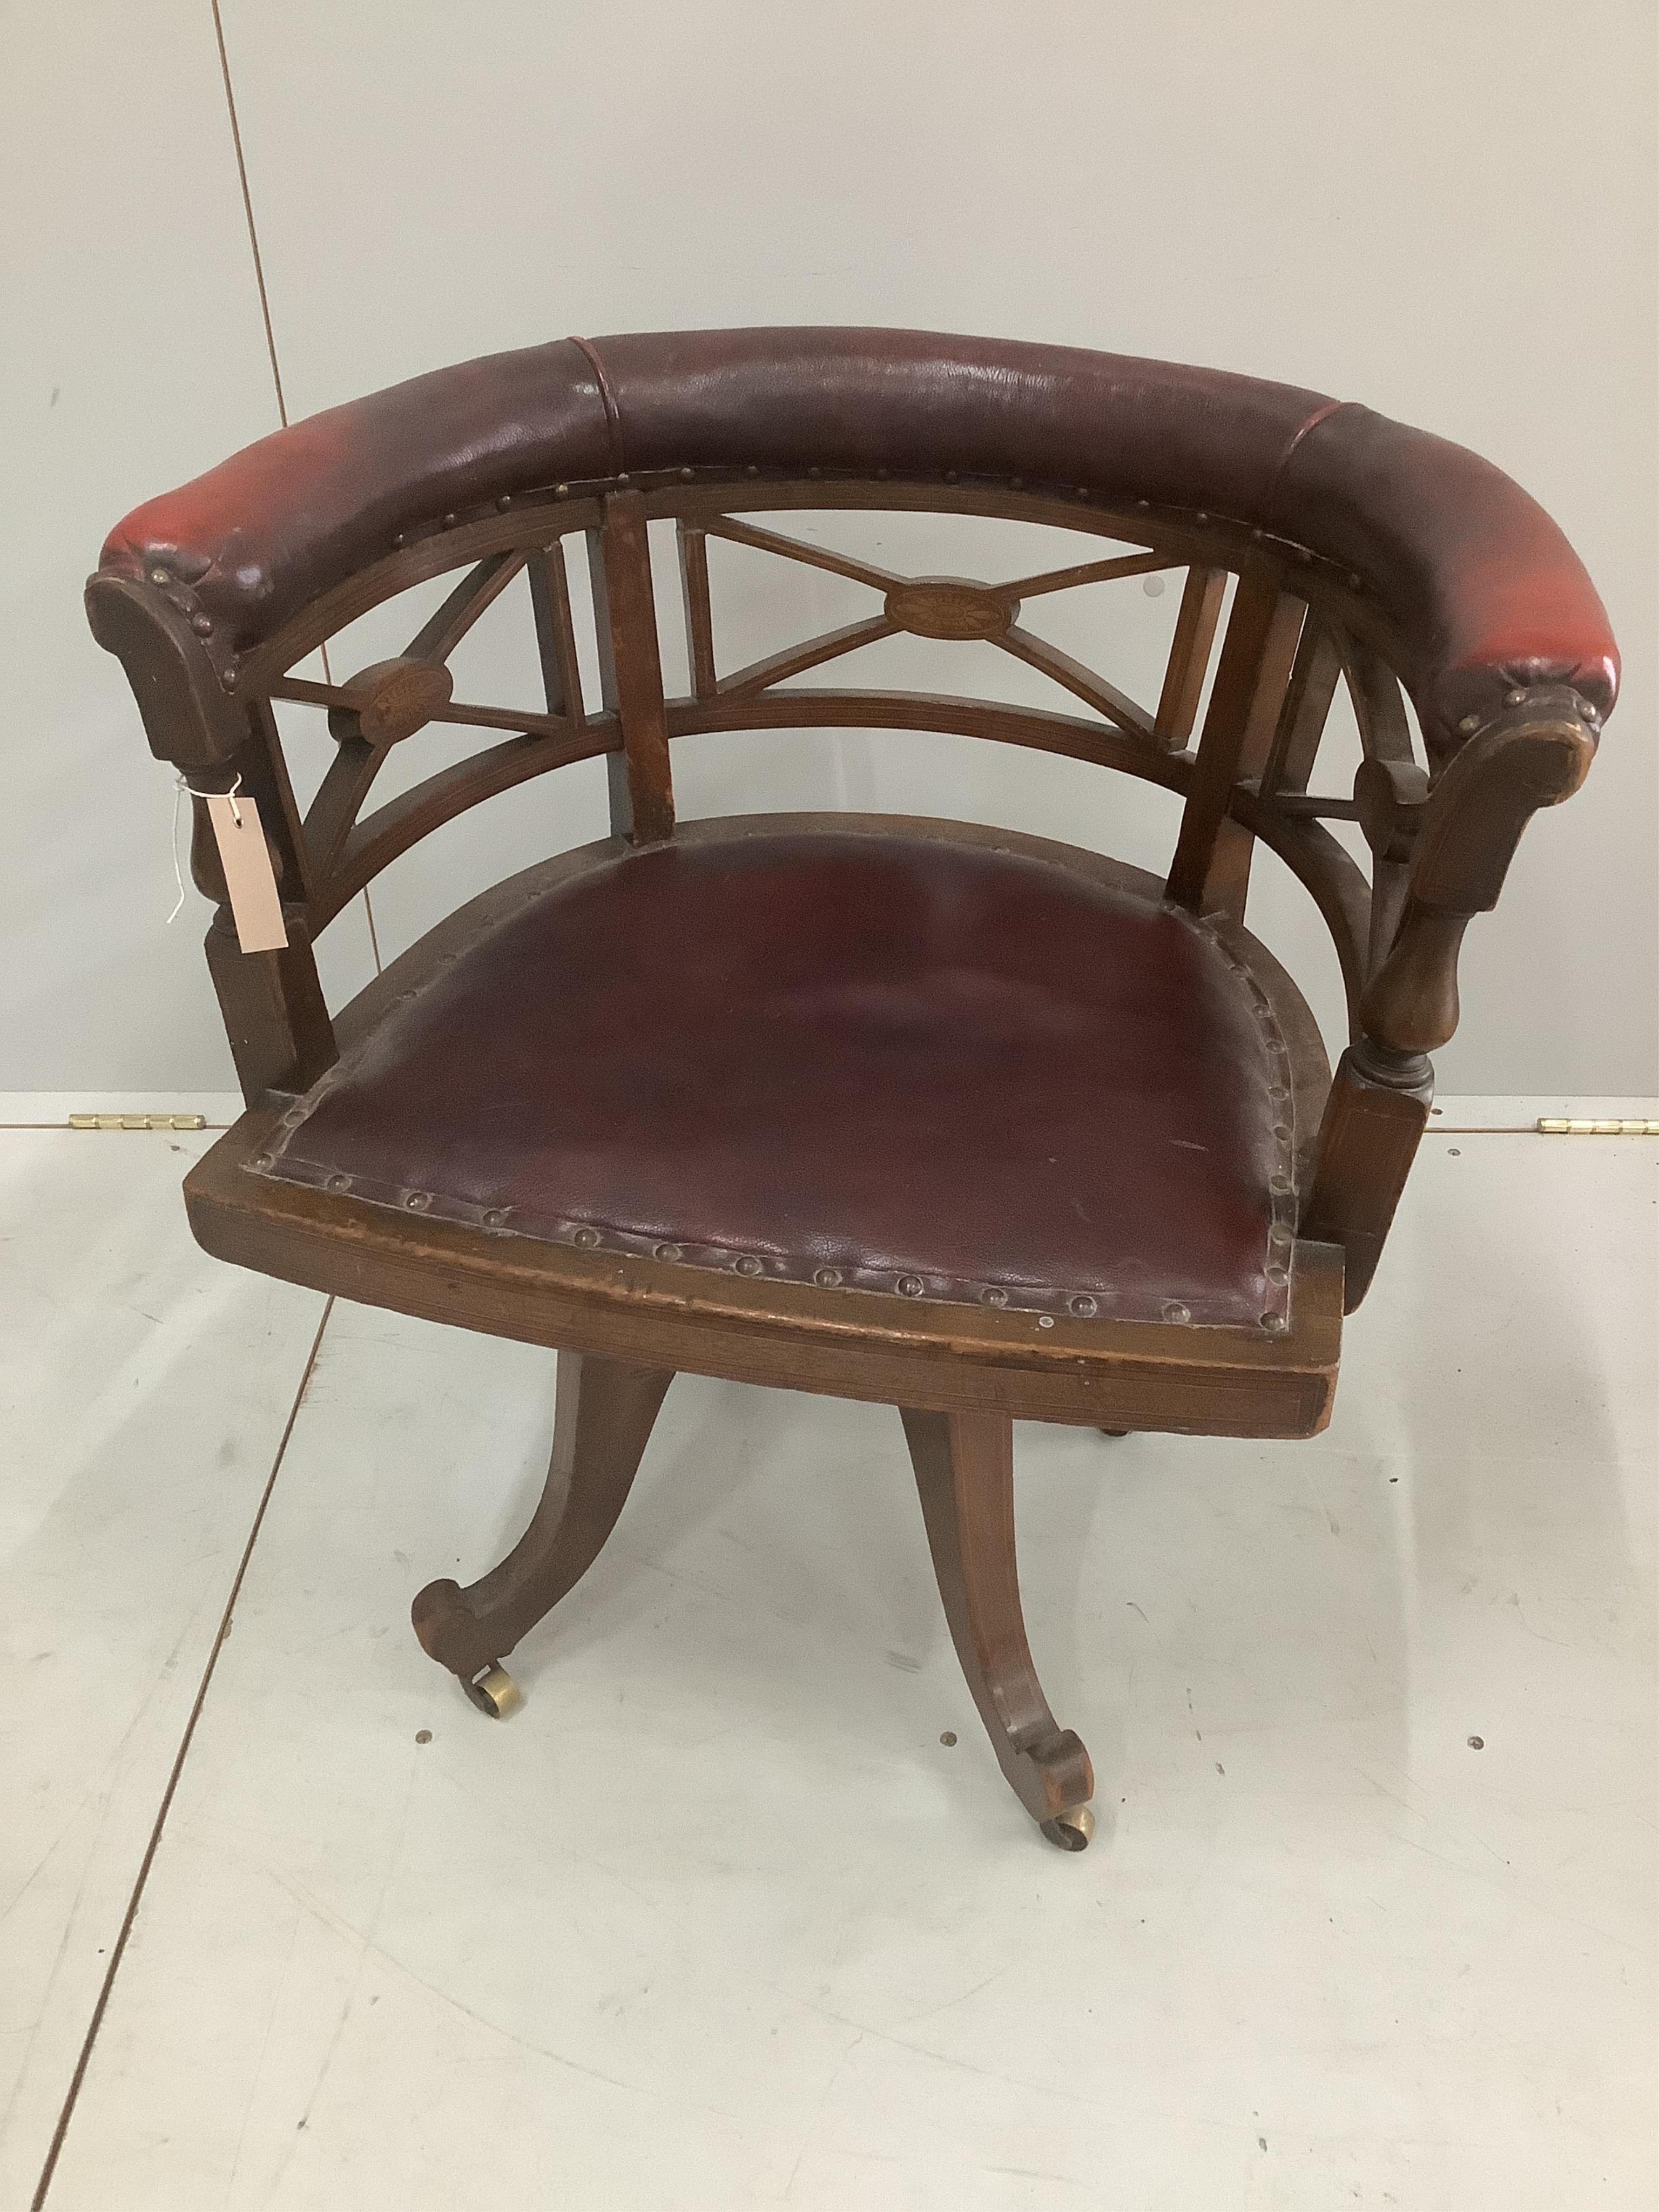 An Edwardian inlaid mahogany leather swivel desk chair, width 65cm, depth 48cm, height 68cm. Condition - poor to fair